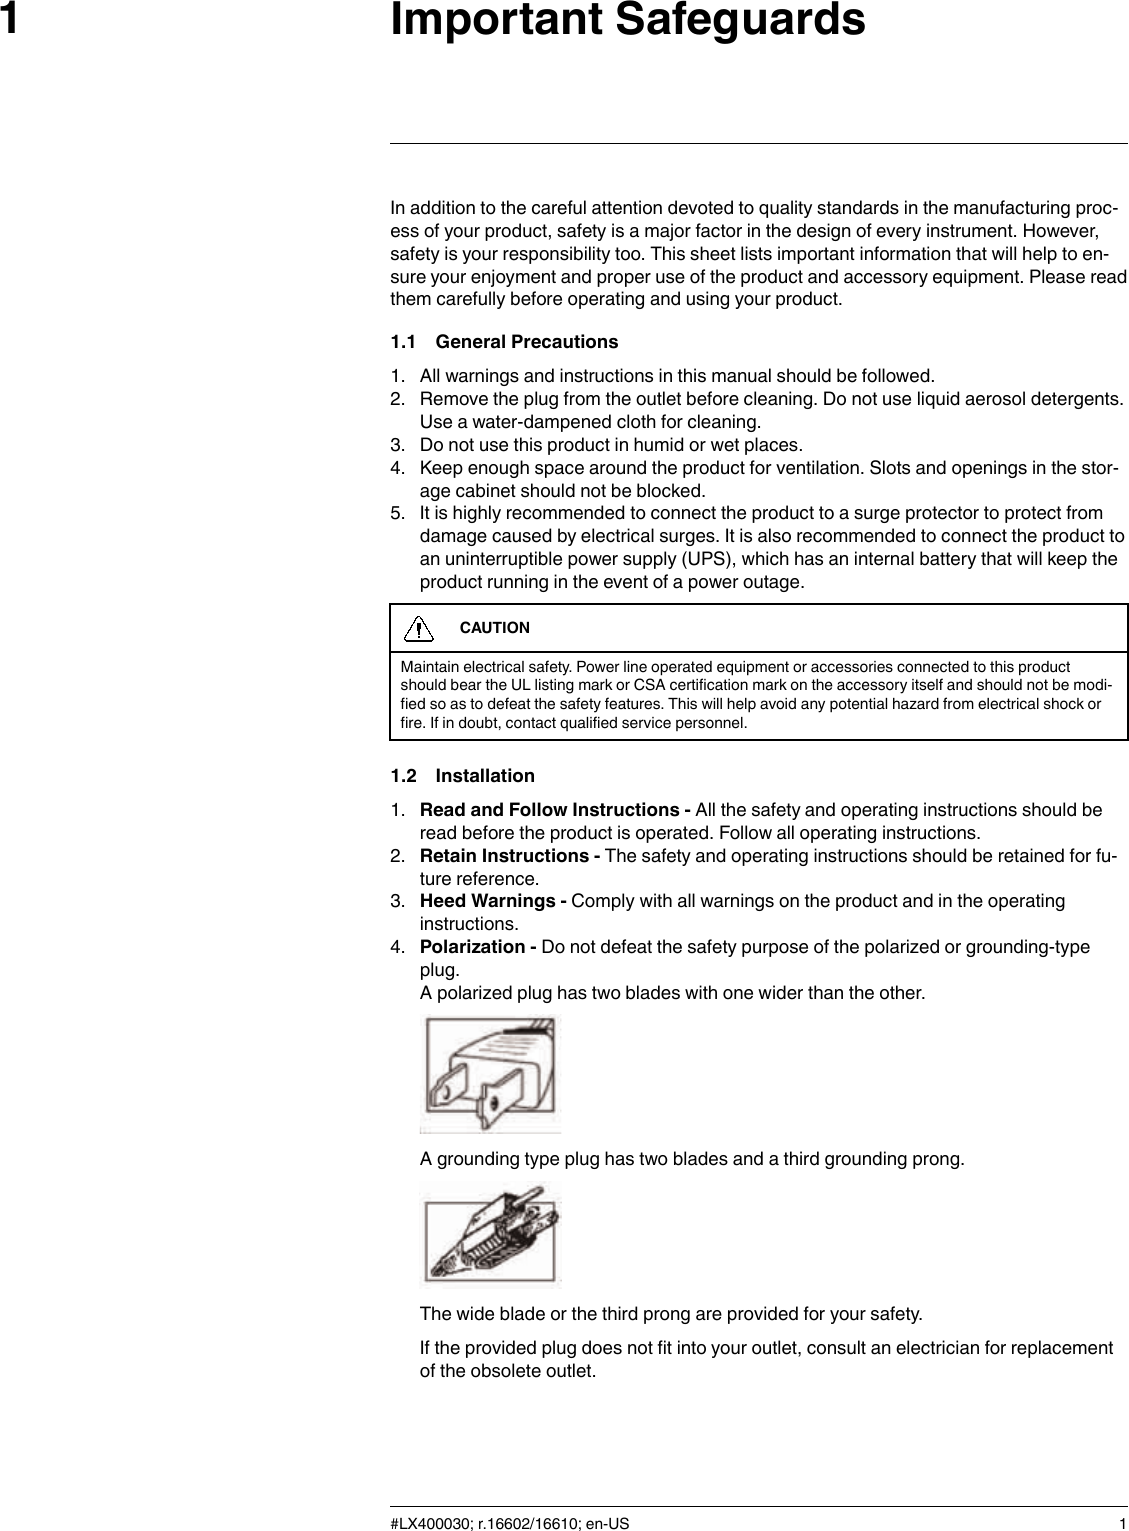 Important Safeguards1In addition to the careful attention devoted to quality standards in the manufacturing proc-ess of your product, safety is a major factor in the design of every instrument. However,safety is your responsibility too. This sheet lists important information that will help to en-sure your enjoyment and proper use of the product and accessory equipment. Please readthem carefully before operating and using your product.1.1 General Precautions1. All warnings and instructions in this manual should be followed.2. Remove the plug from the outlet before cleaning. Do not use liquid aerosol detergents.Use a water-dampened cloth for cleaning.3. Do not use this product in humid or wet places.4. Keep enough space around the product for ventilation. Slots and openings in the stor-age cabinet should not be blocked.5. It is highly recommended to connect the product to a surge protector to protect fromdamage caused by electrical surges. It is also recommended to connect the product toan uninterruptible power supply (UPS), which has an internal battery that will keep theproduct running in the event of a power outage.CAUTIONMaintain electrical safety. Power line operated equipment or accessories connected to this productshould bear the UL listing mark or CSA certification mark on the accessory itself and should not be modi-fied so as to defeat the safety features. This will help avoid any potential hazard from electrical shock orfire. If in doubt, contact qualified service personnel.1.2 Installation1. Read and Follow Instructions - All the safety and operating instructions should beread before the product is operated. Follow all operating instructions.2. Retain Instructions - The safety and operating instructions should be retained for fu-ture reference.3. Heed Warnings - Comply with all warnings on the product and in the operatinginstructions.4. Polarization - Do not defeat the safety purpose of the polarized or grounding-typeplug.A polarized plug has two blades with one wider than the other.A grounding type plug has two blades and a third grounding prong.The wide blade or the third prong are provided for your safety.If the provided plug does not fit into your outlet, consult an electrician for replacementof the obsolete outlet.#LX400030; r.16602/16610; en-US 1